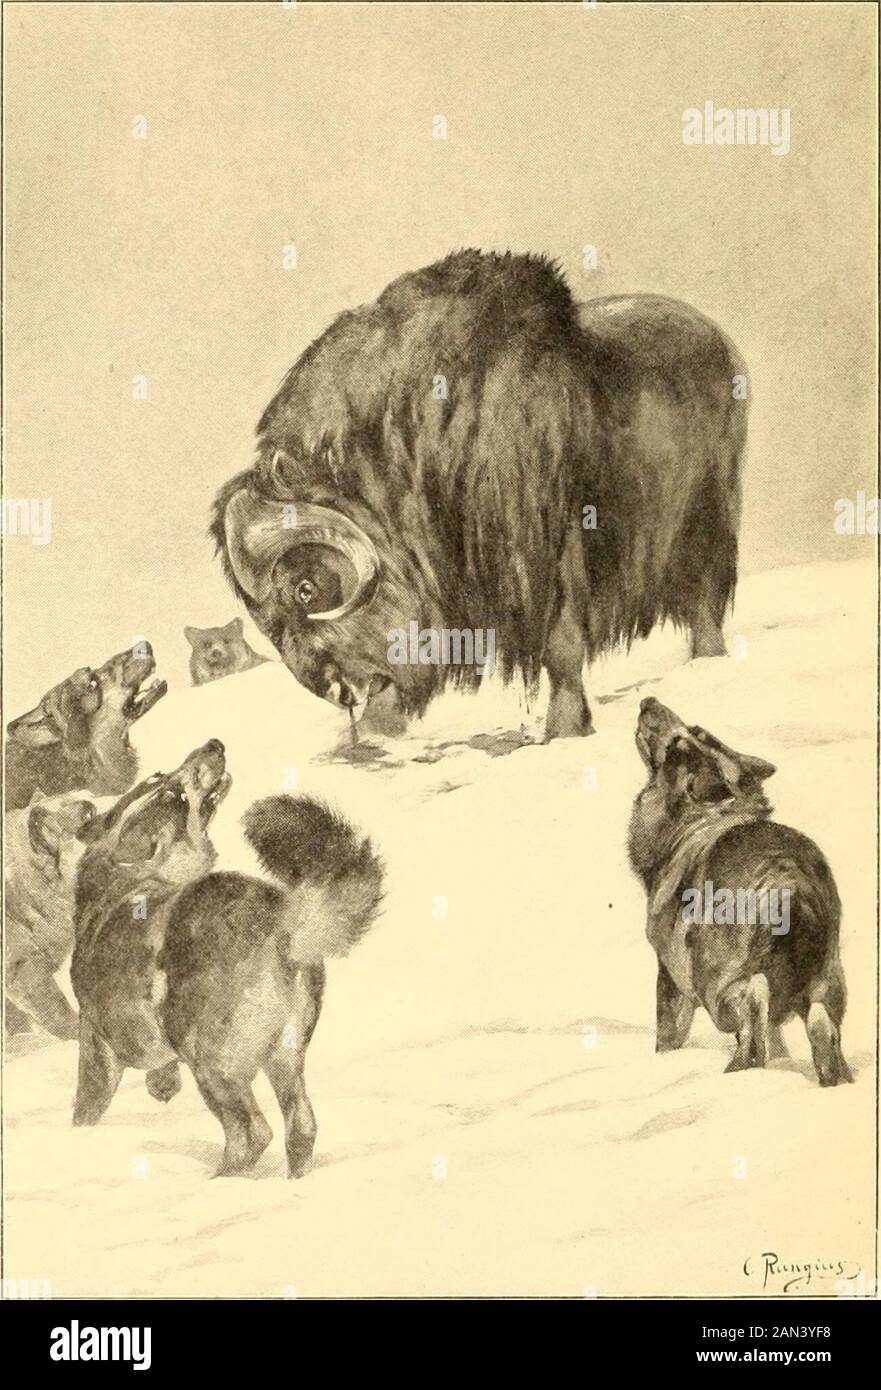 Musk-ox, bison, sheep and goat . mightget wind of the other two of the four after whichI had originally started, or find tracks of strag-glers from the main herd. Several miles I wenton, but finding no tracks, and darkness comingdown, I turned to make my way back, knowingthat the Indians would follow up and camp bythe slain musk-oxen for the night. But as Ijourneyed I suddenly realized that, except forgoing in a southerly direction, I really had nodefinite idea of the exact direction in which Iwas travelling, and with night setting in and achilling wind blowing I knew that to lose my-self migh Stock Photo